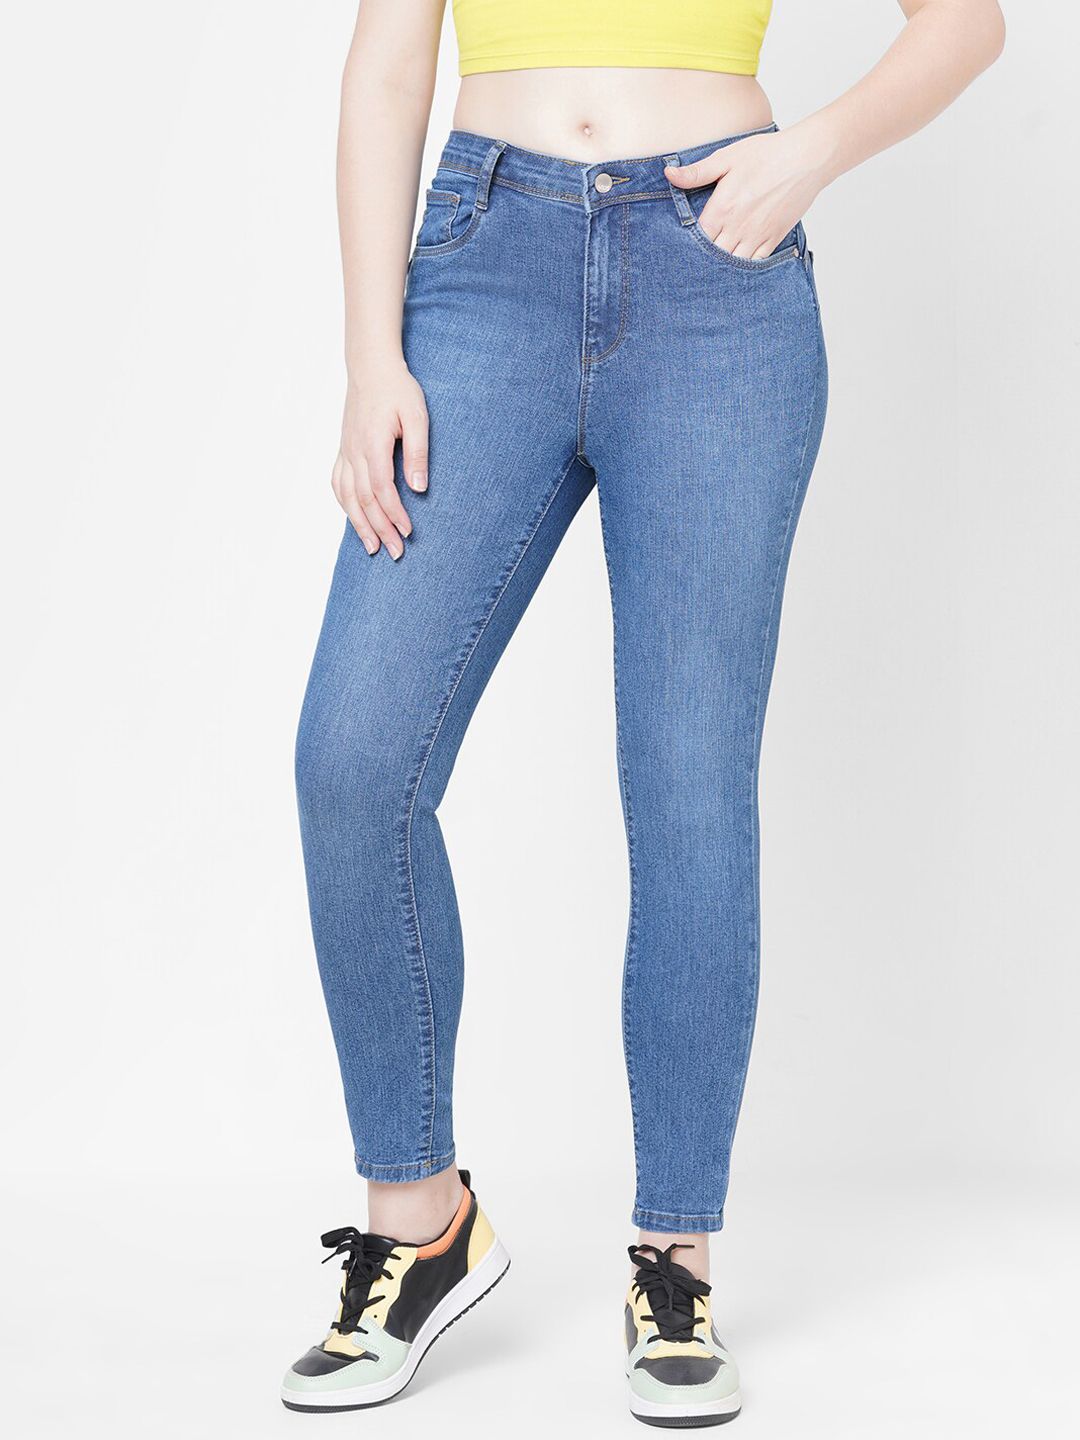 Kraus Jeans Women Blue Skinny Fit Light Fade Jeans Price in India